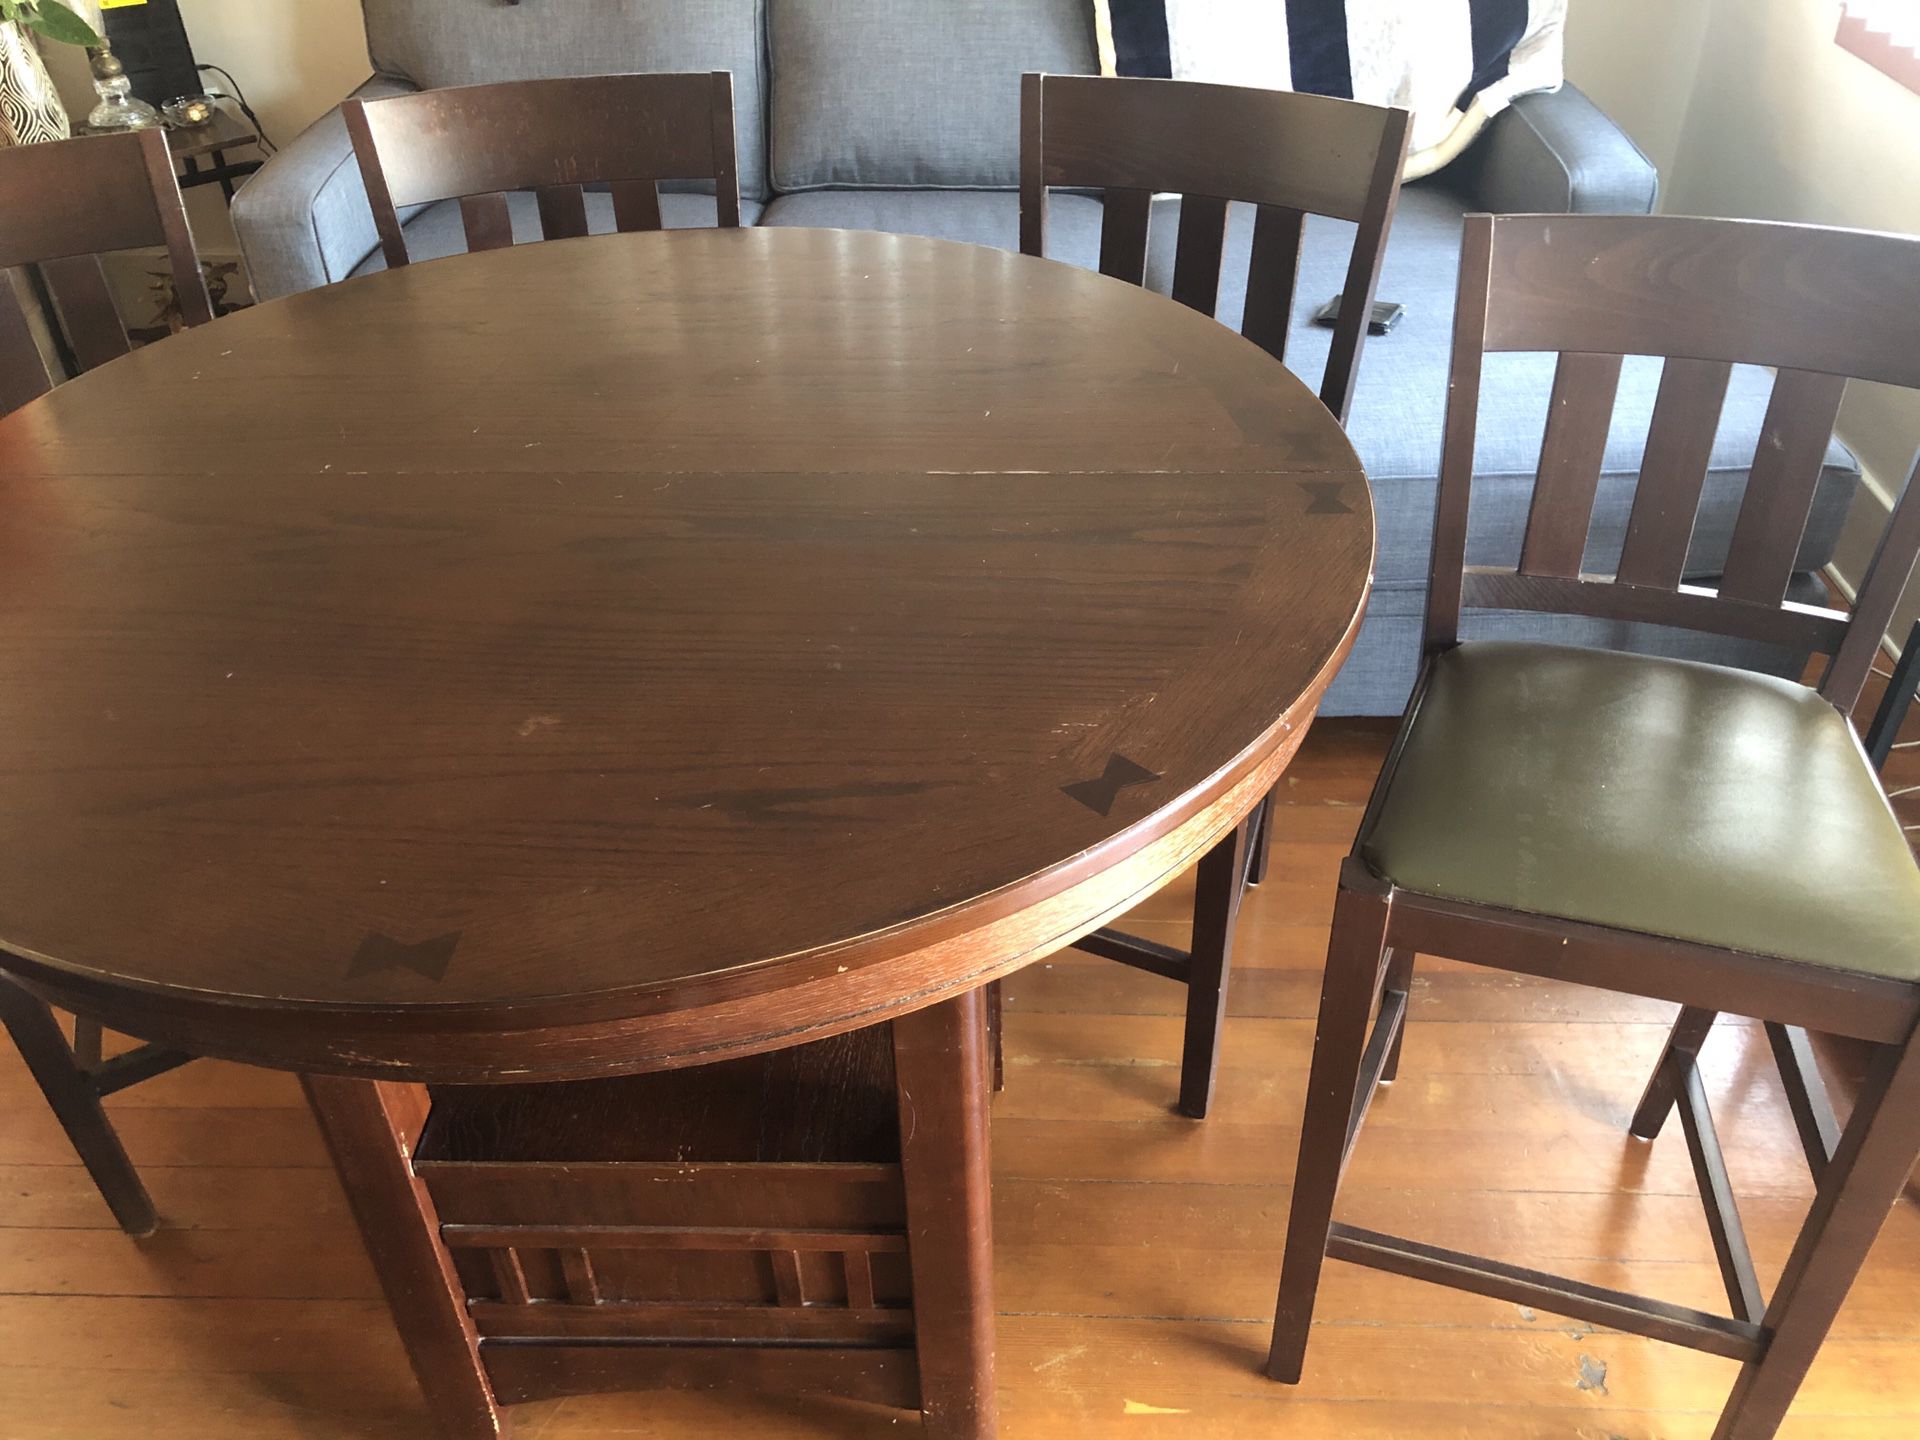 wood table with chairs